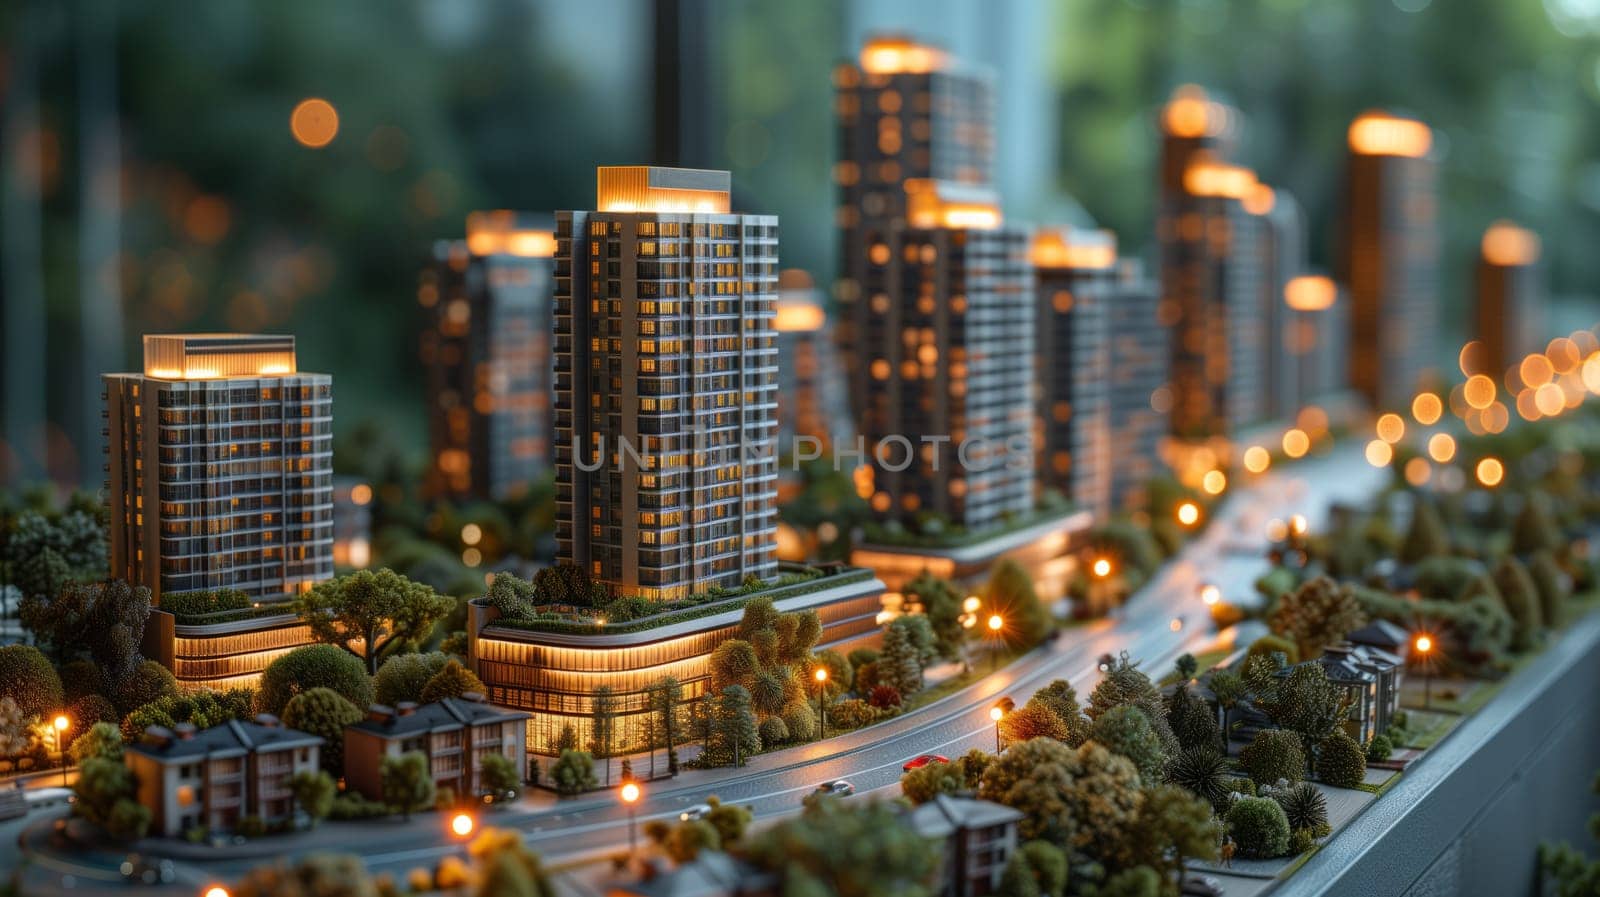 An architectural model of an urban city with a mix of skyscrapers and residential buildings, surrounded by lush landscapes and trees